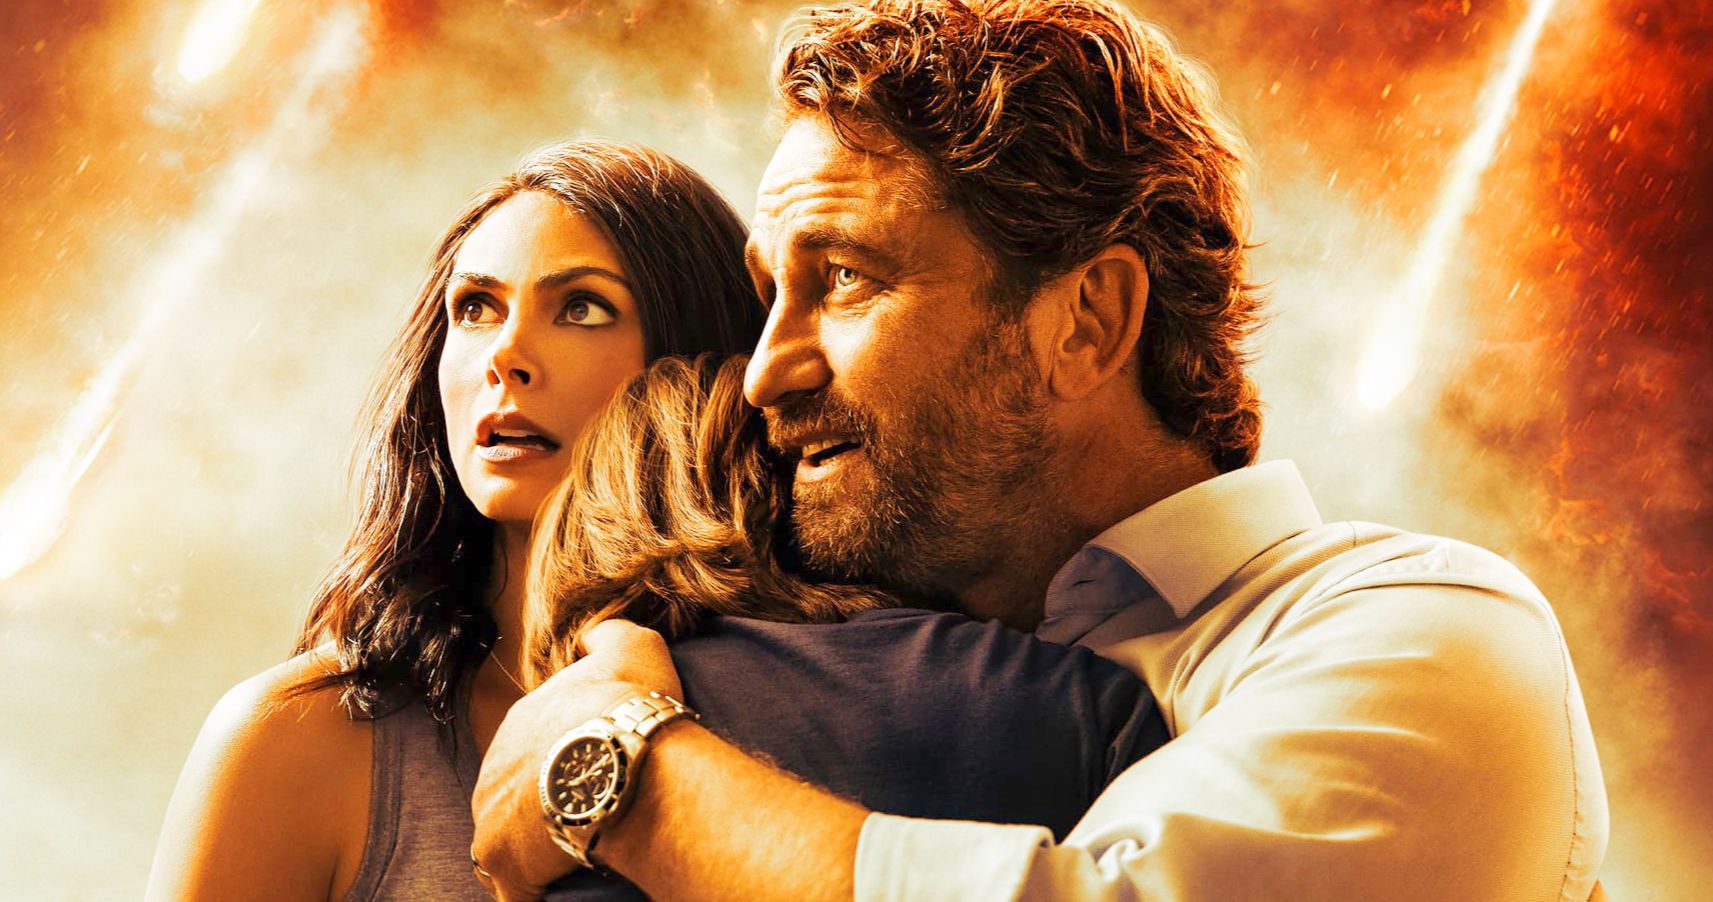 Greenland 2 Is Happening with Gerard Butler and Morena Baccarin Both Returning